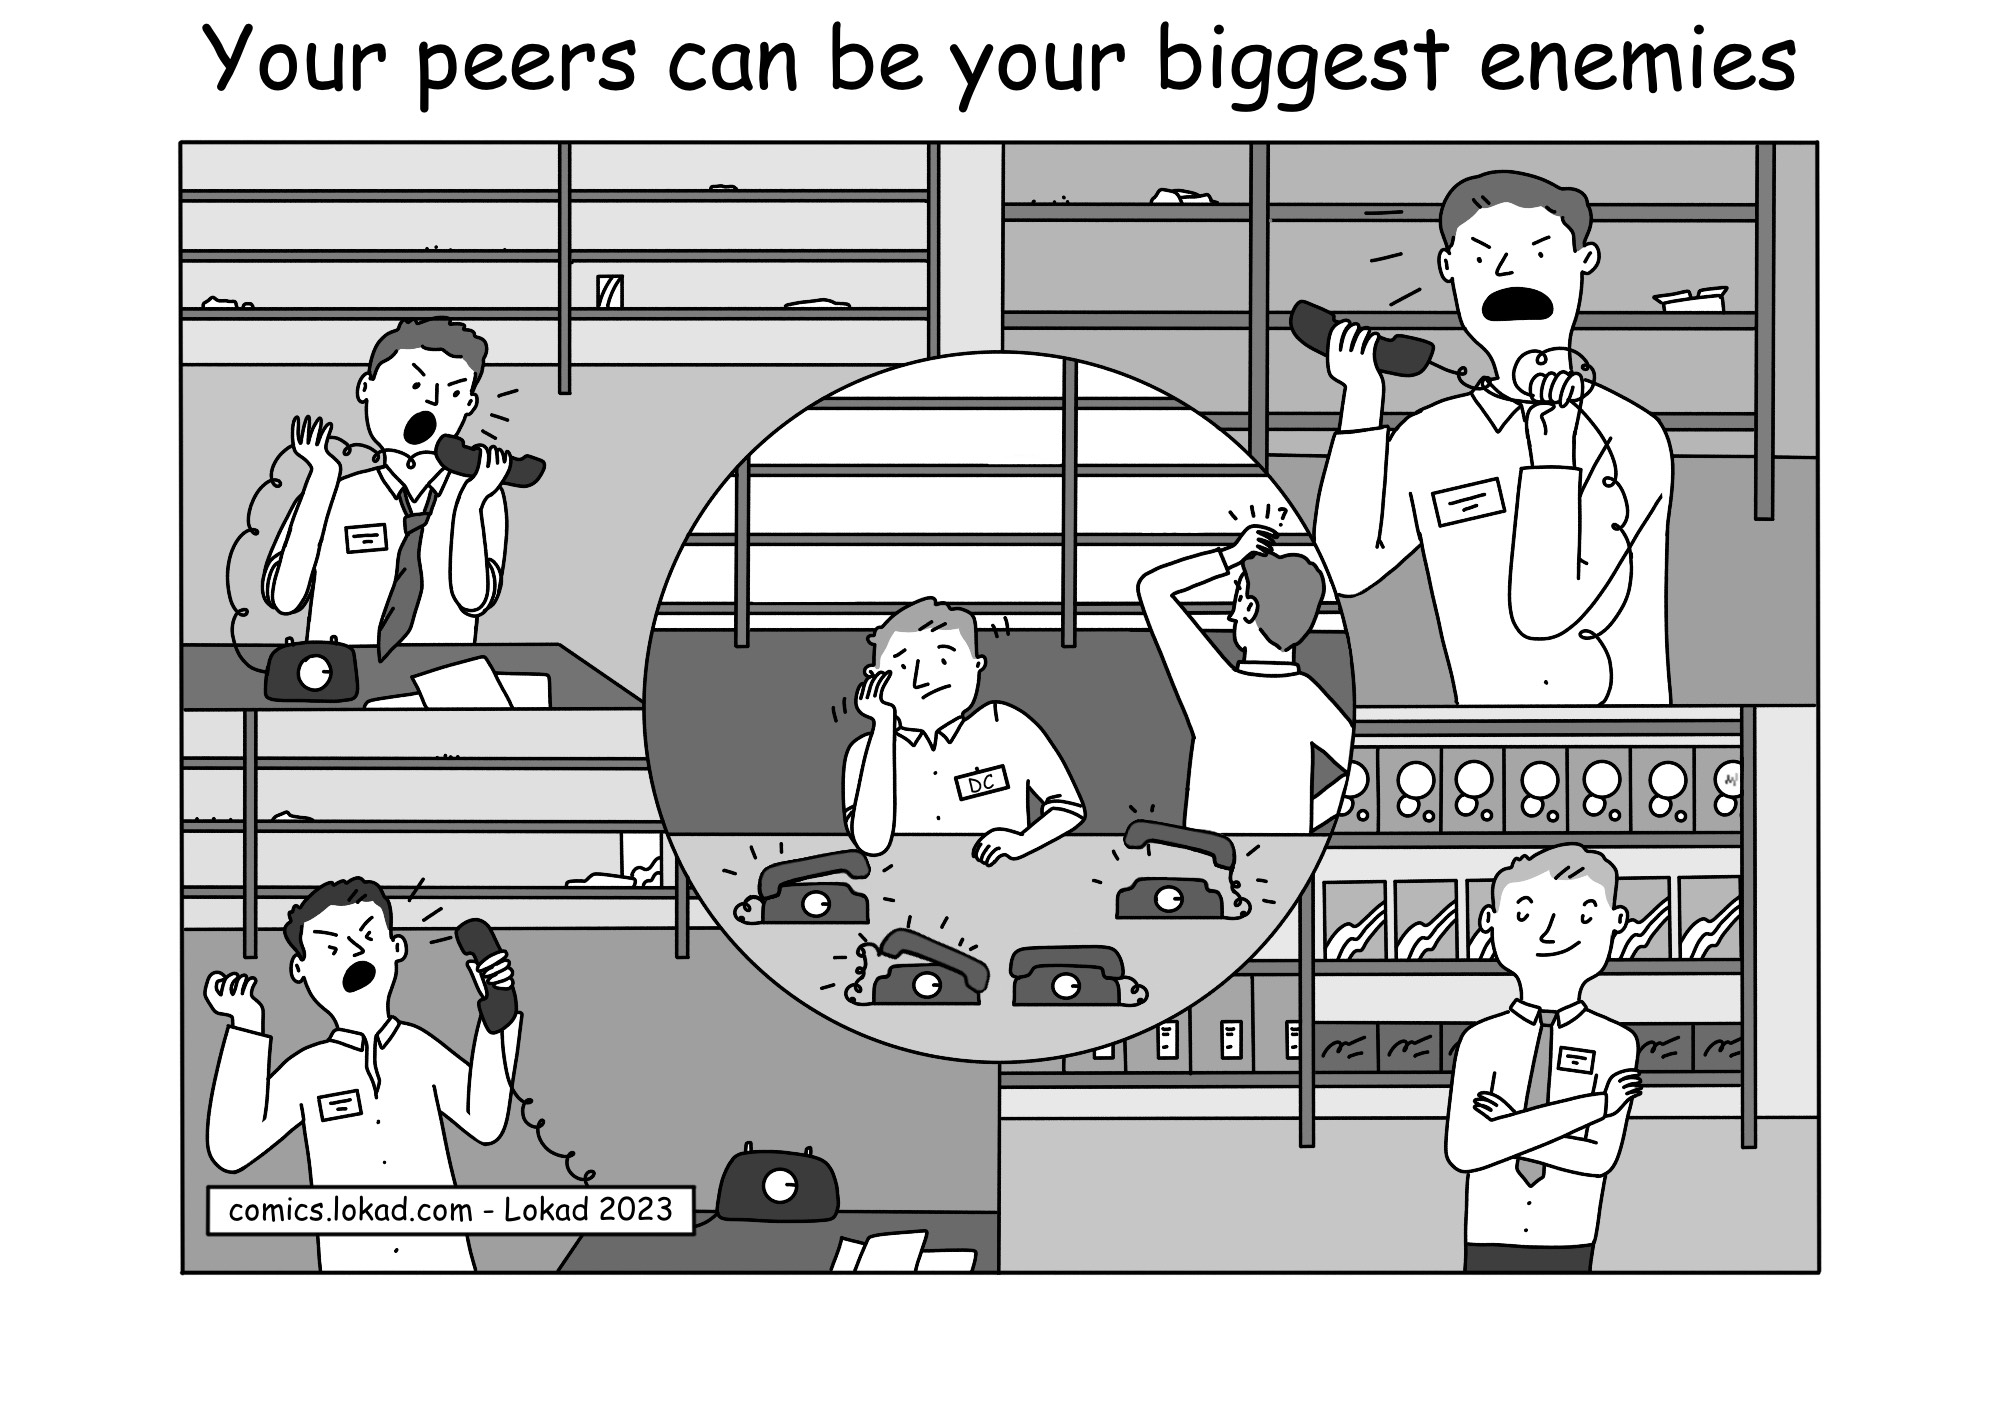 Your peers can be your biggest enemies